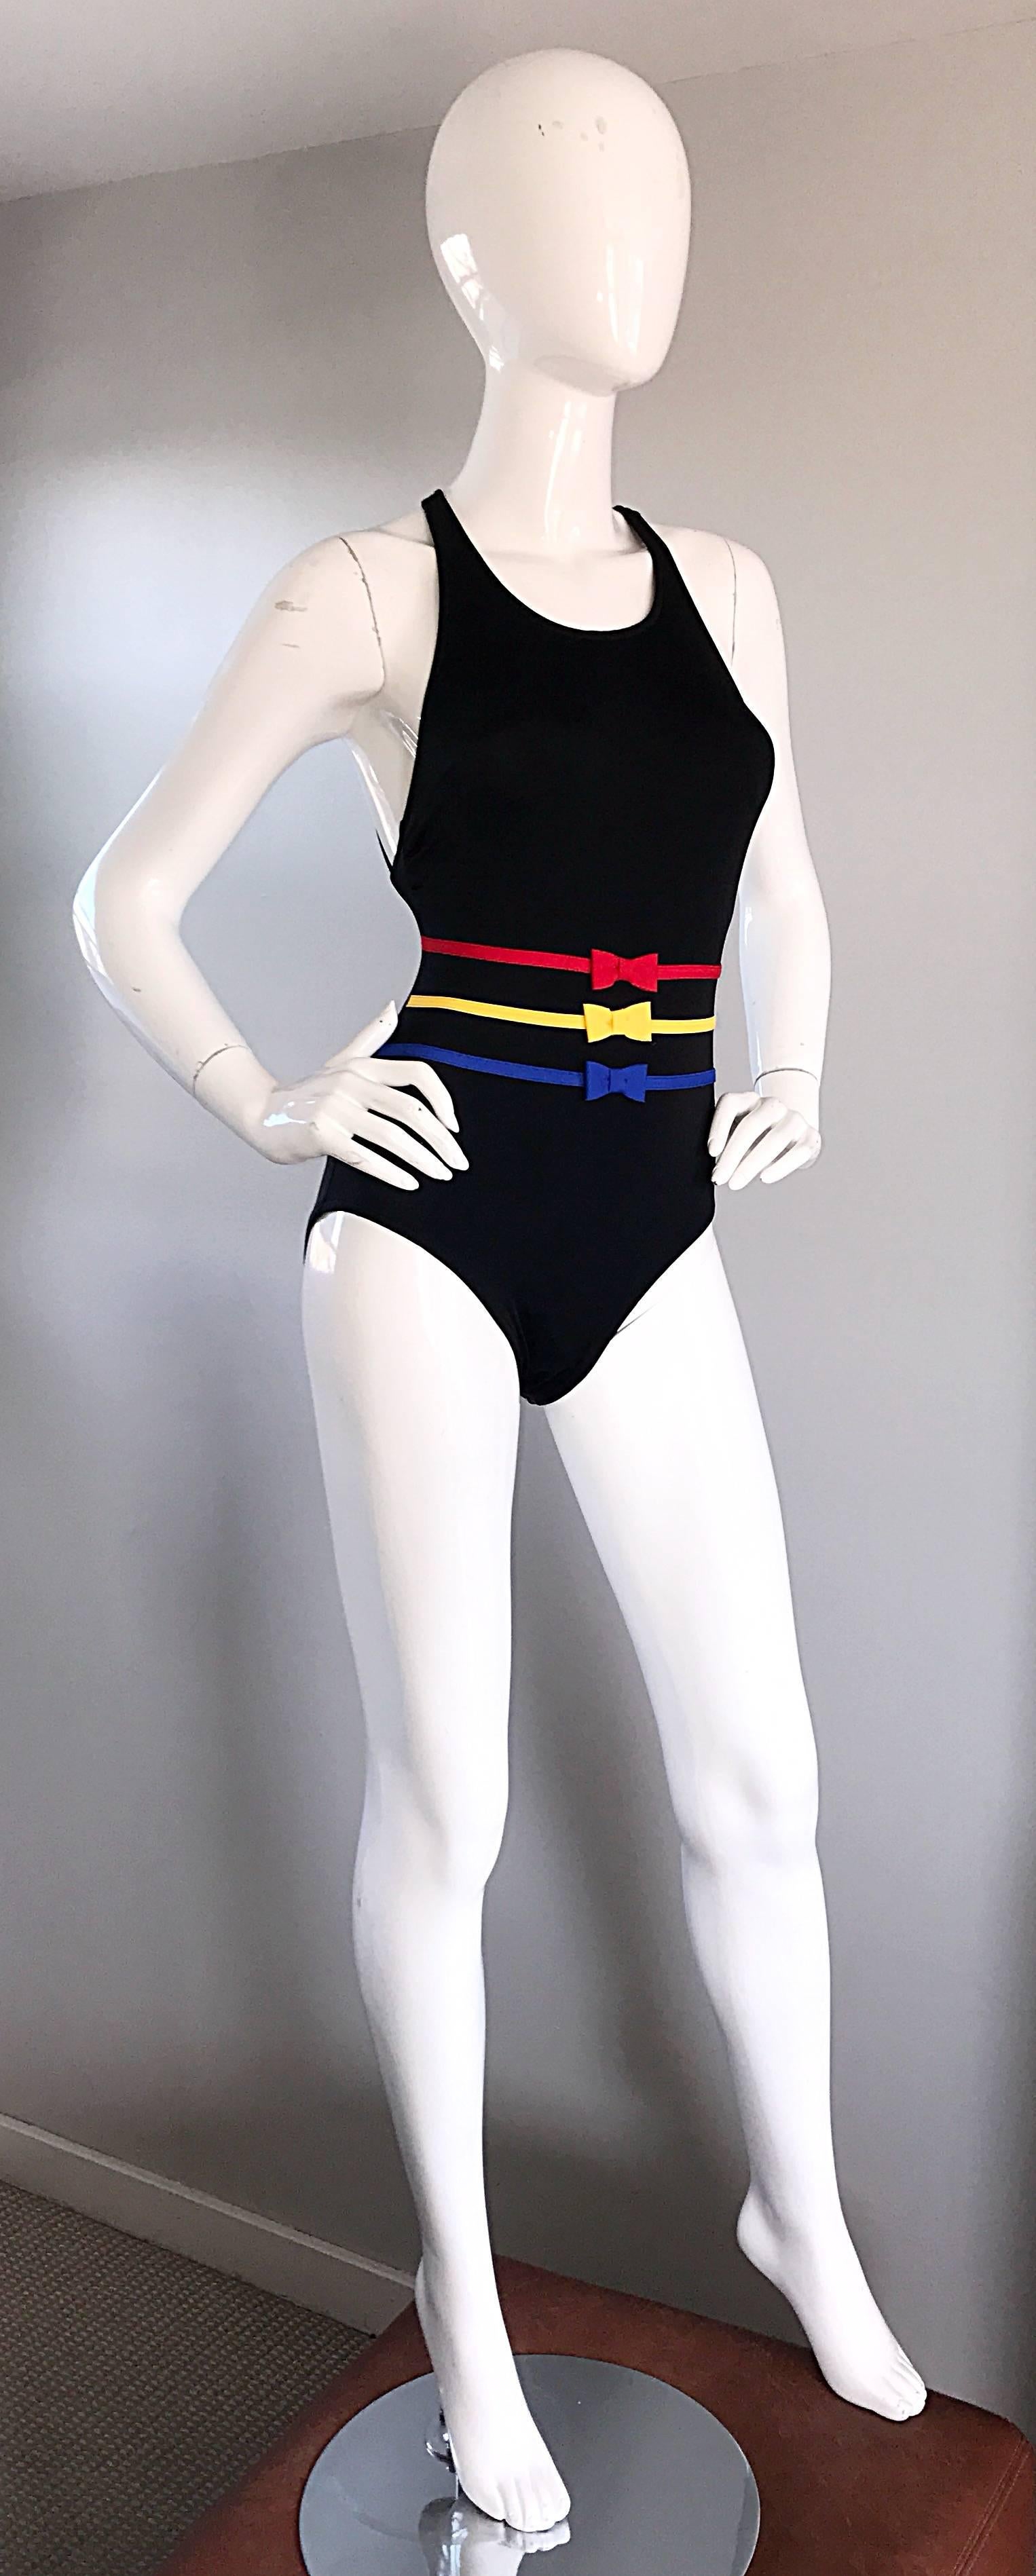 Bill Blass New Vintage 1990s 90s Chic One Piece Swimsuit / Bodysuit with Bows 2